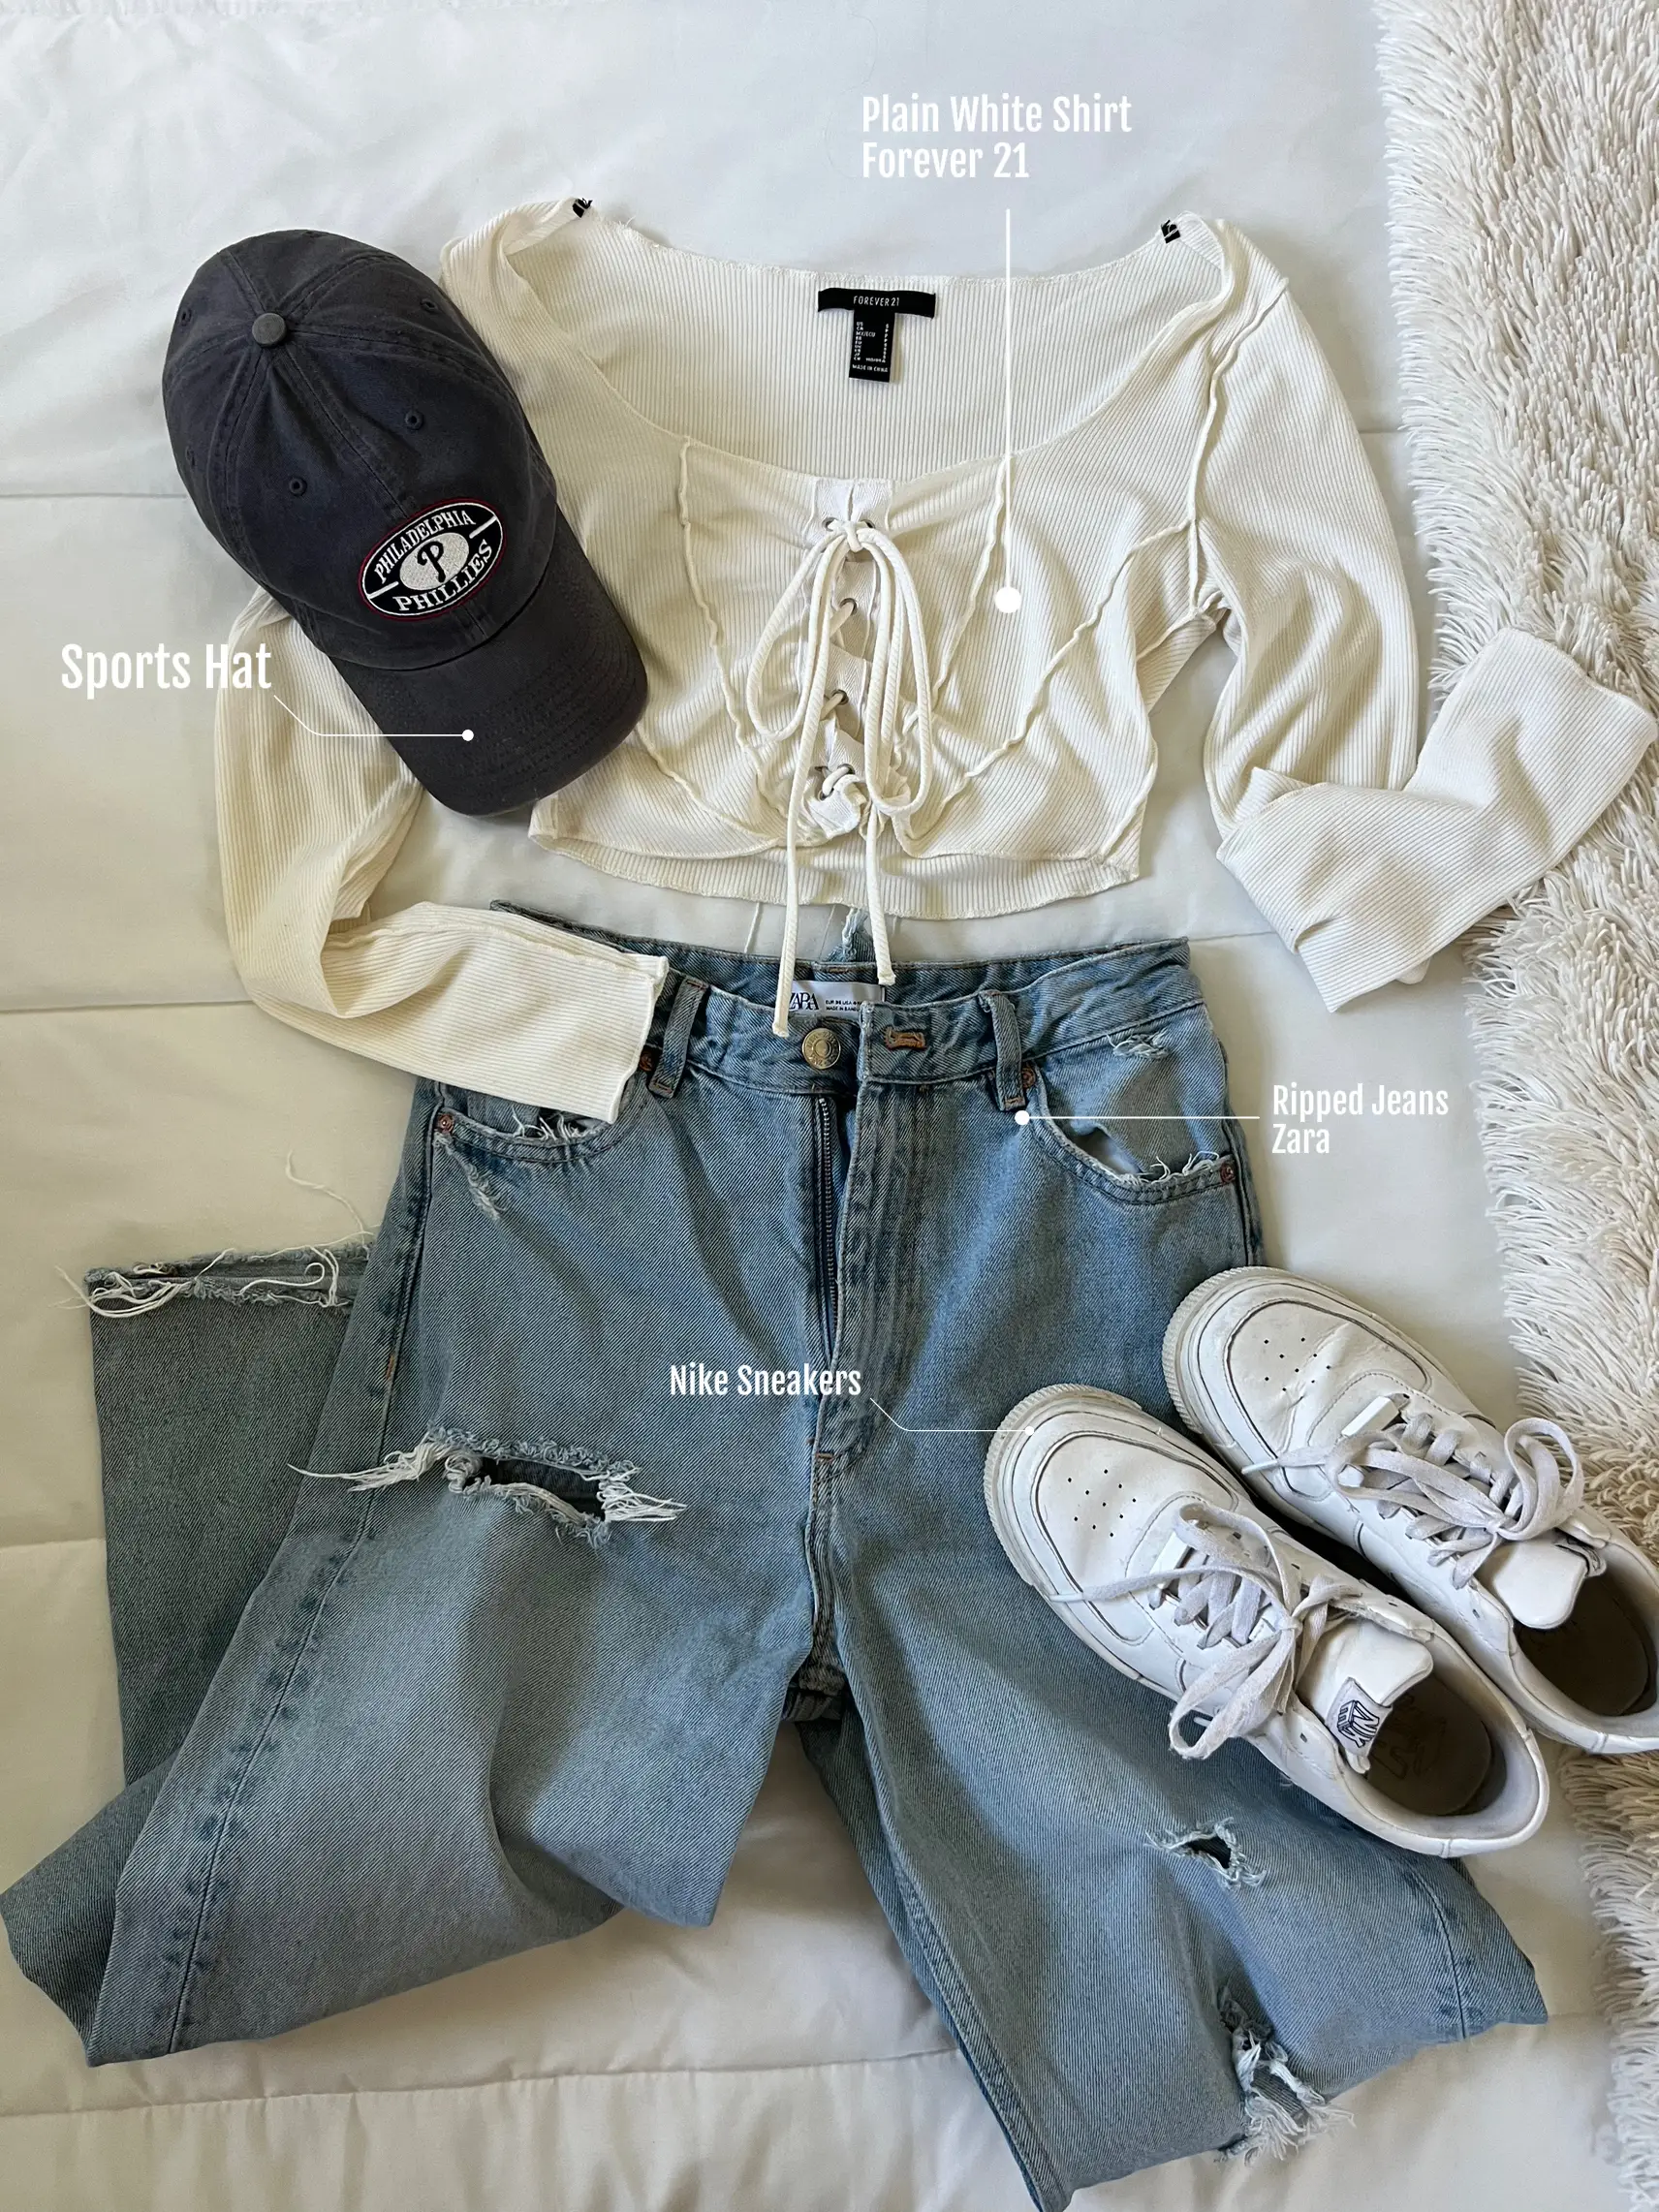 BASEBALL ⚾️ GAME OUTFIT, Gallery posted by Sarah Force